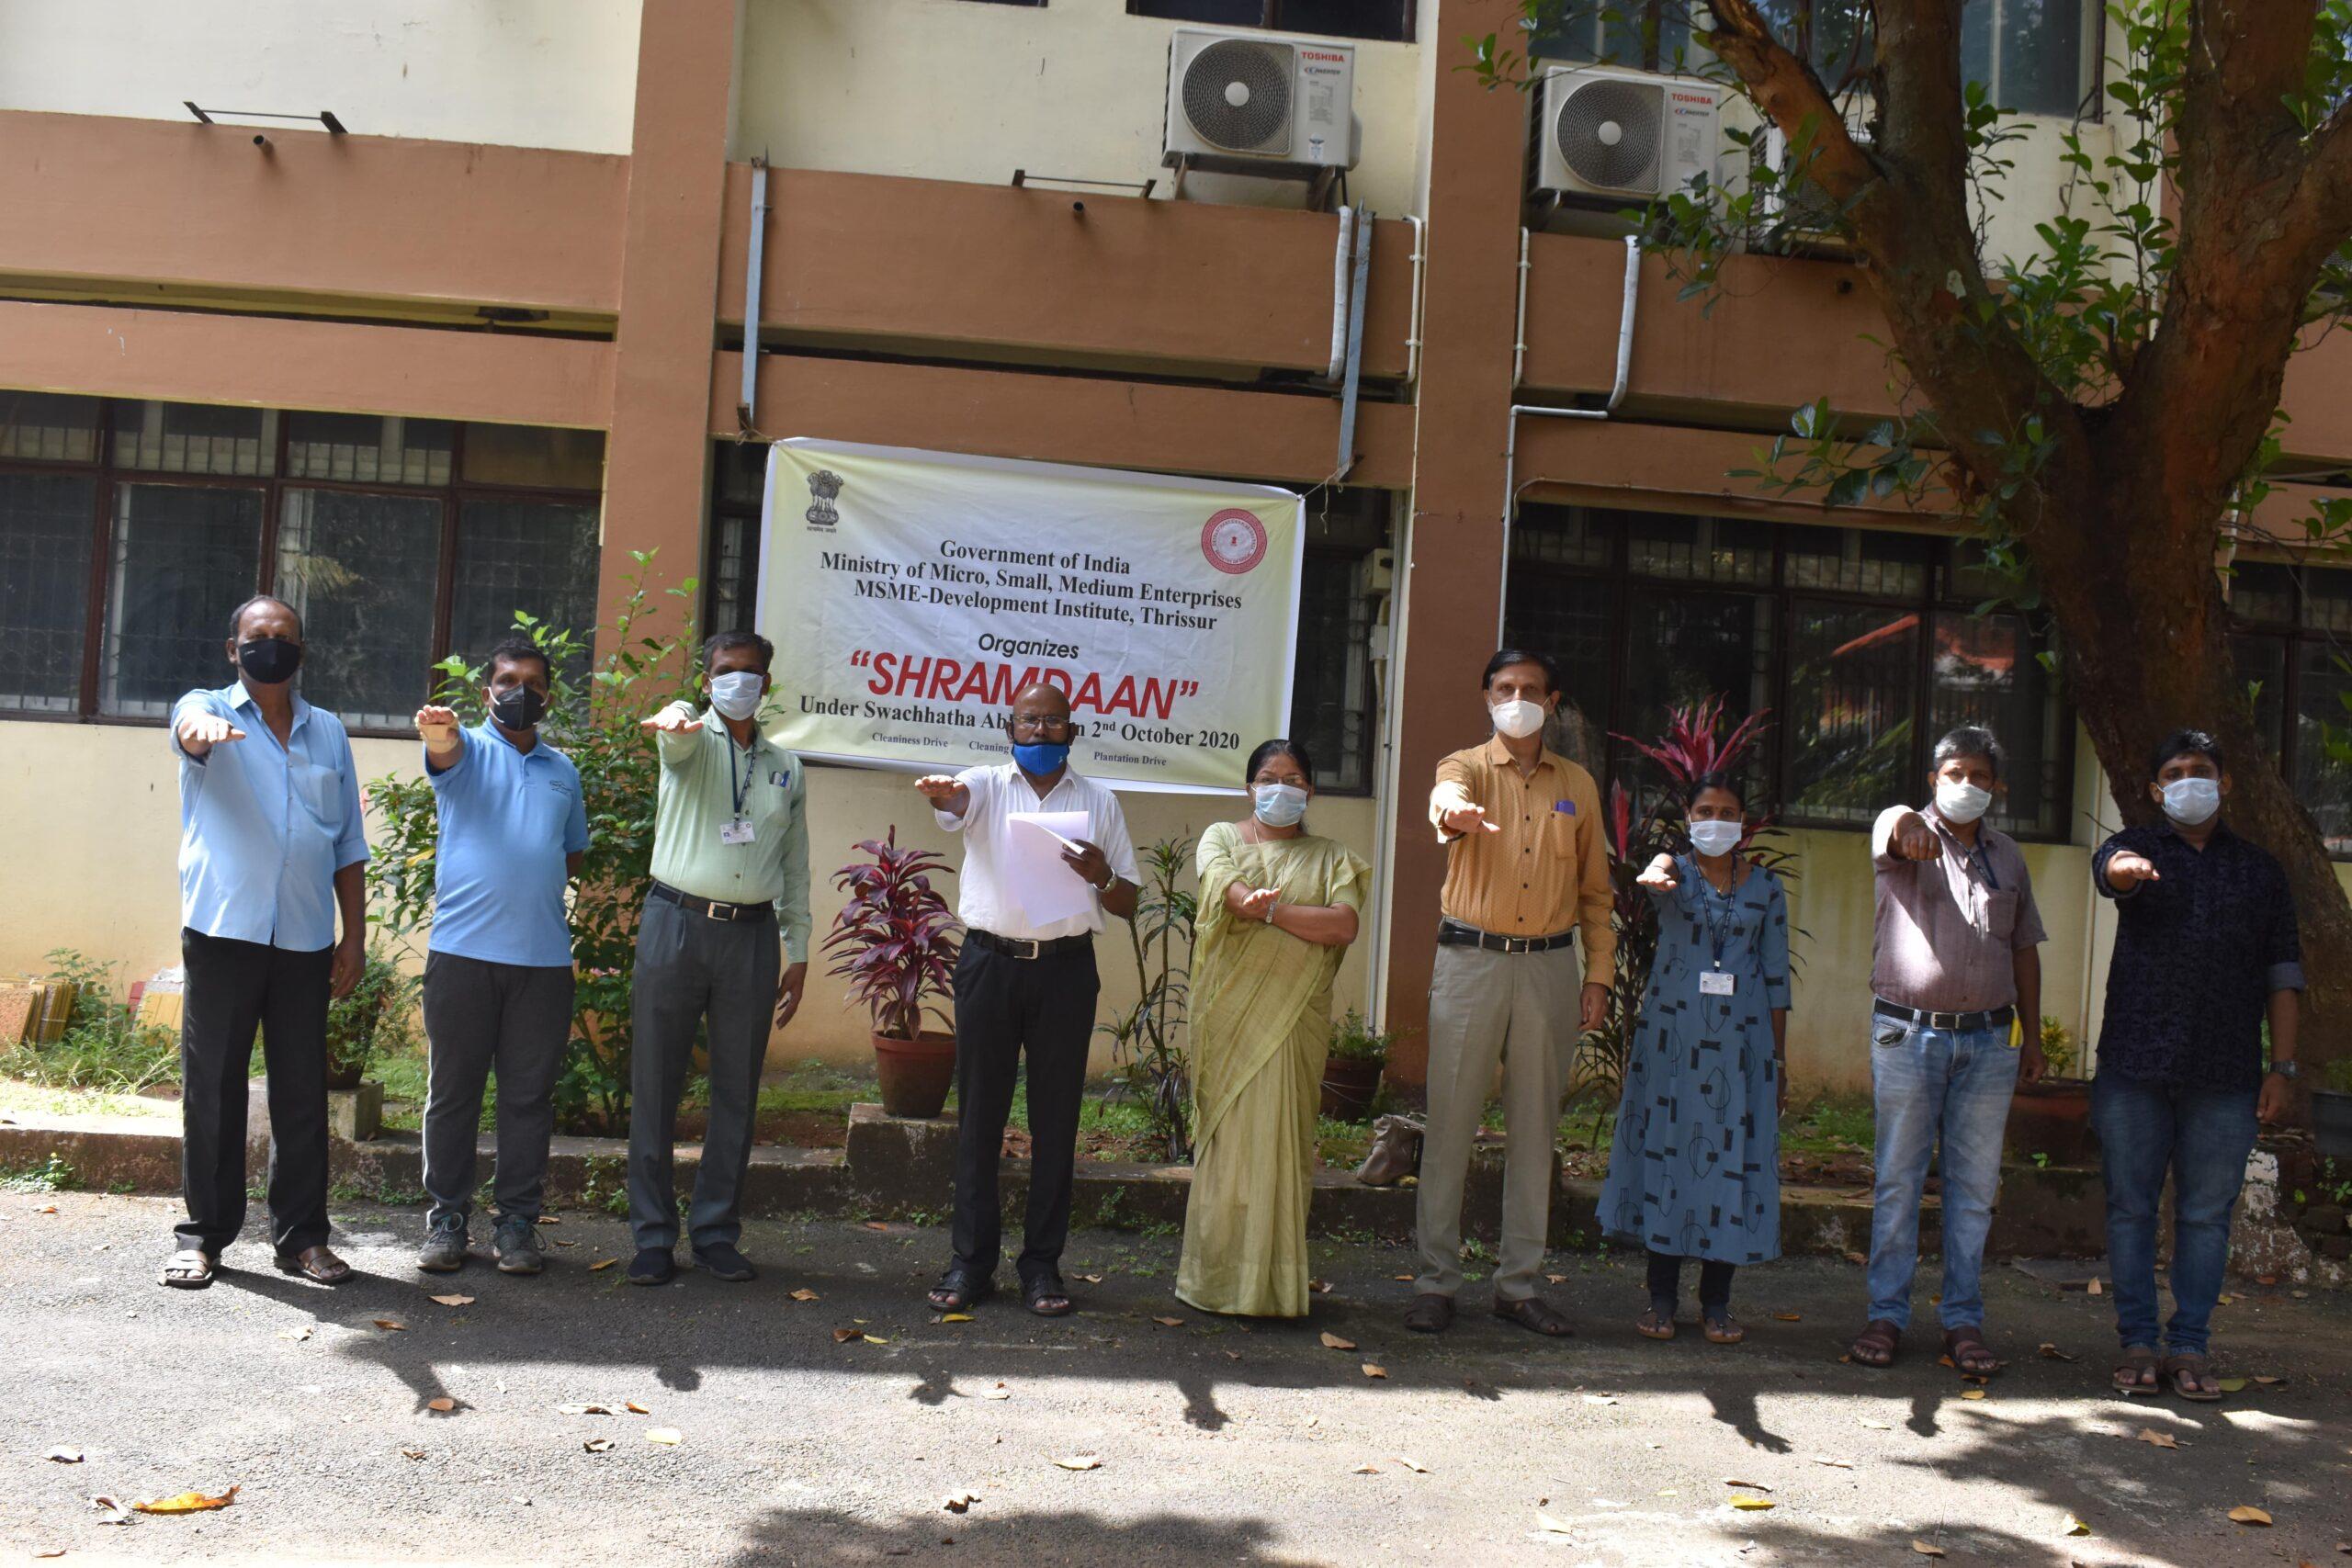 Ministry of MSME's 'Shramdaan Event' for a 'Garbage-Free India'